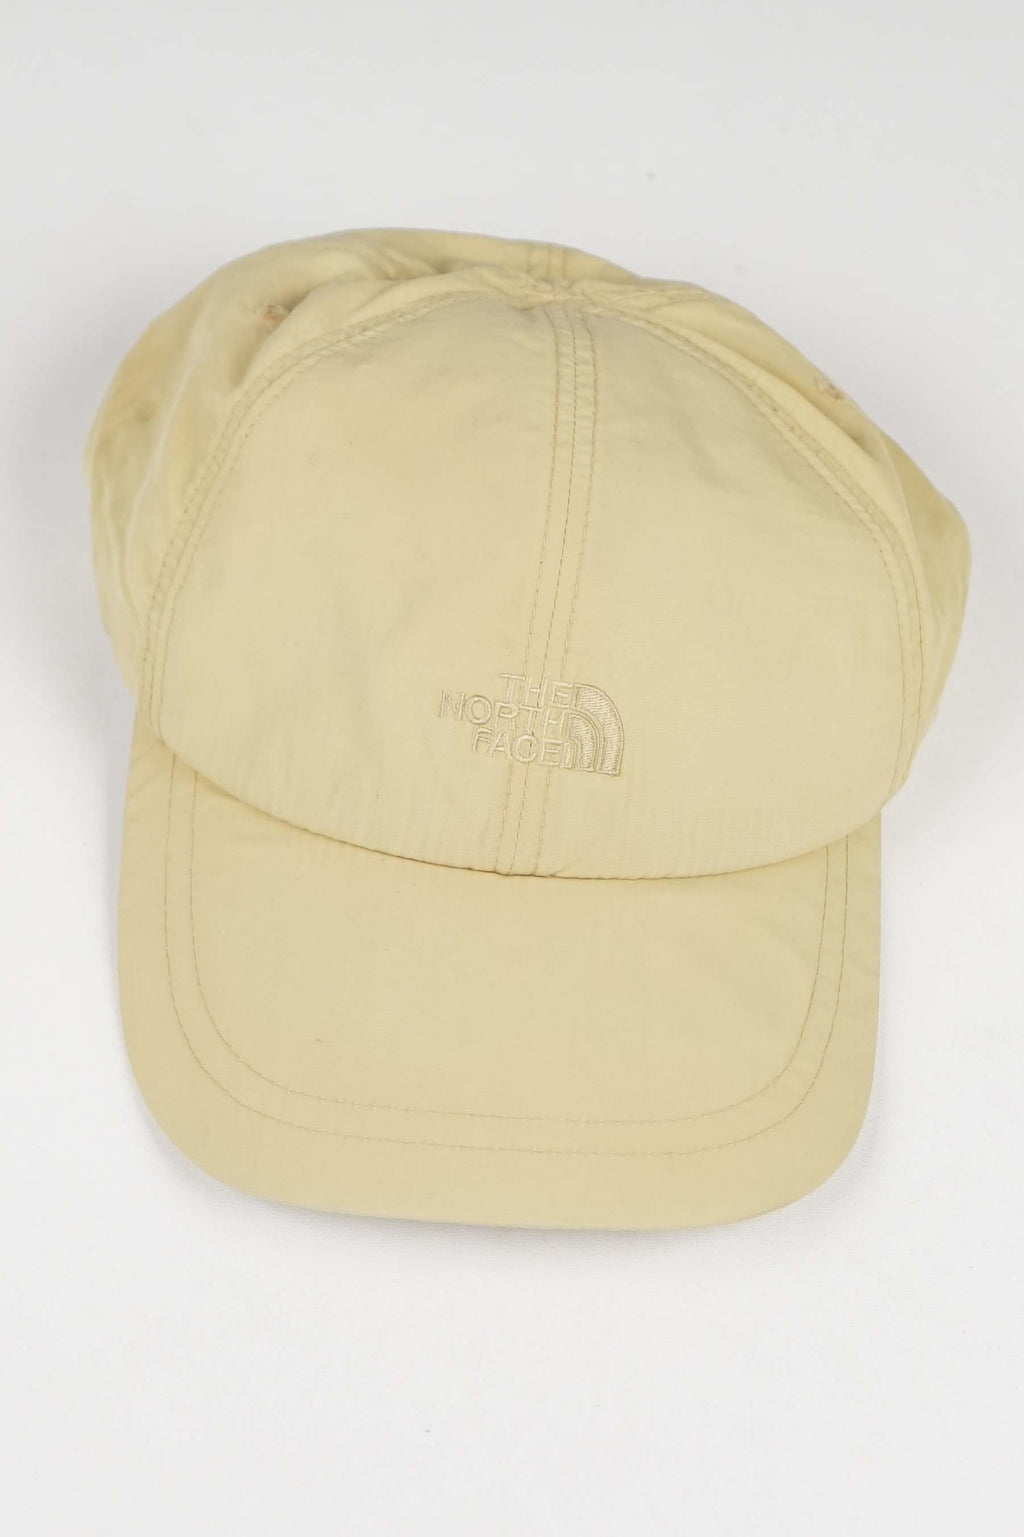 VINTAGE THE NORTH FACE HAT